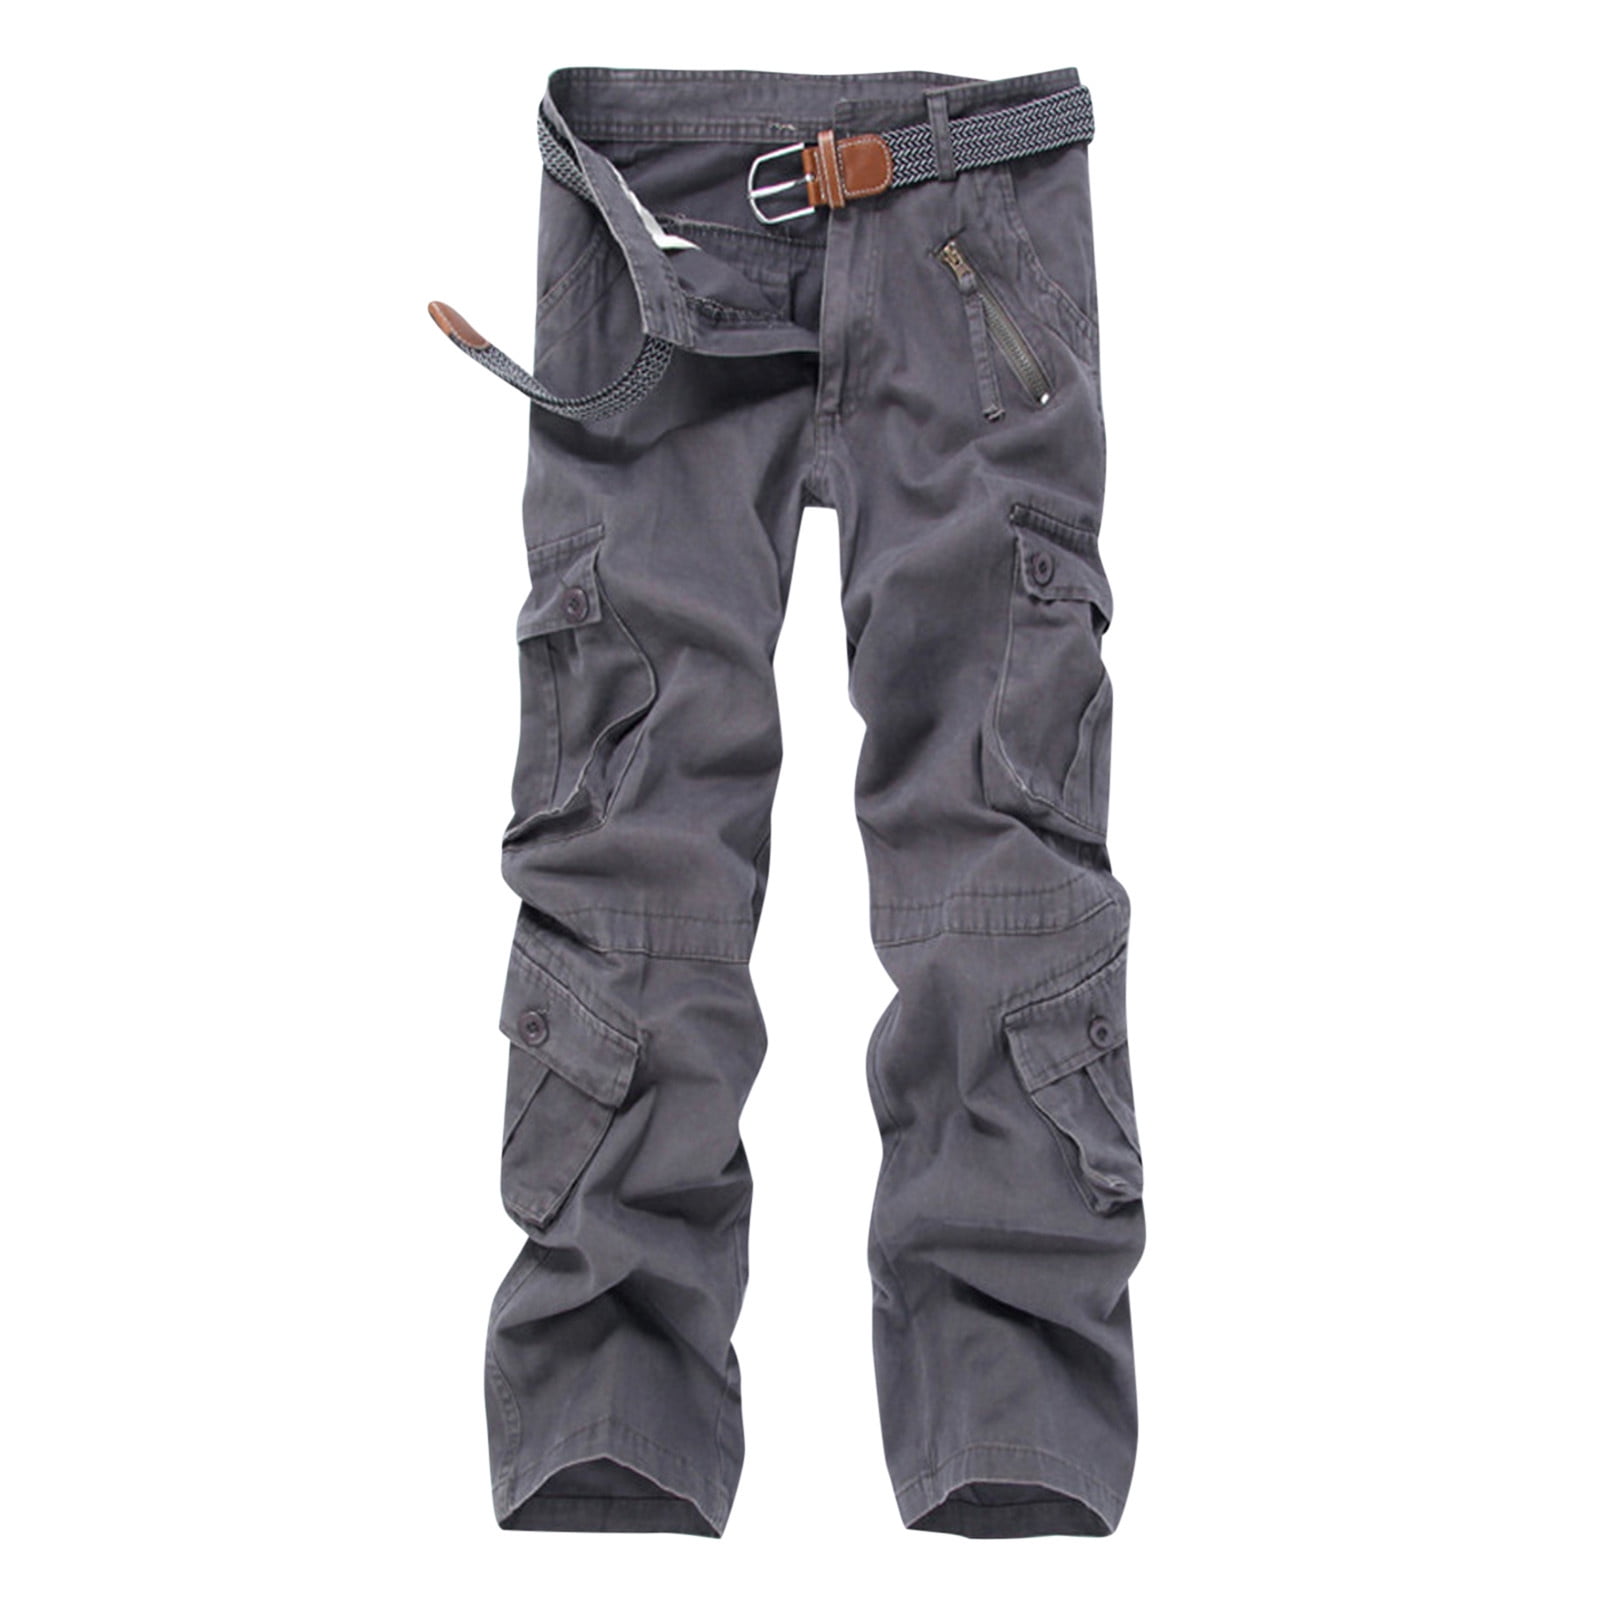 Dezsed Men's Casual Cargo Pants Military Army Camo Pants Clearance Men ...